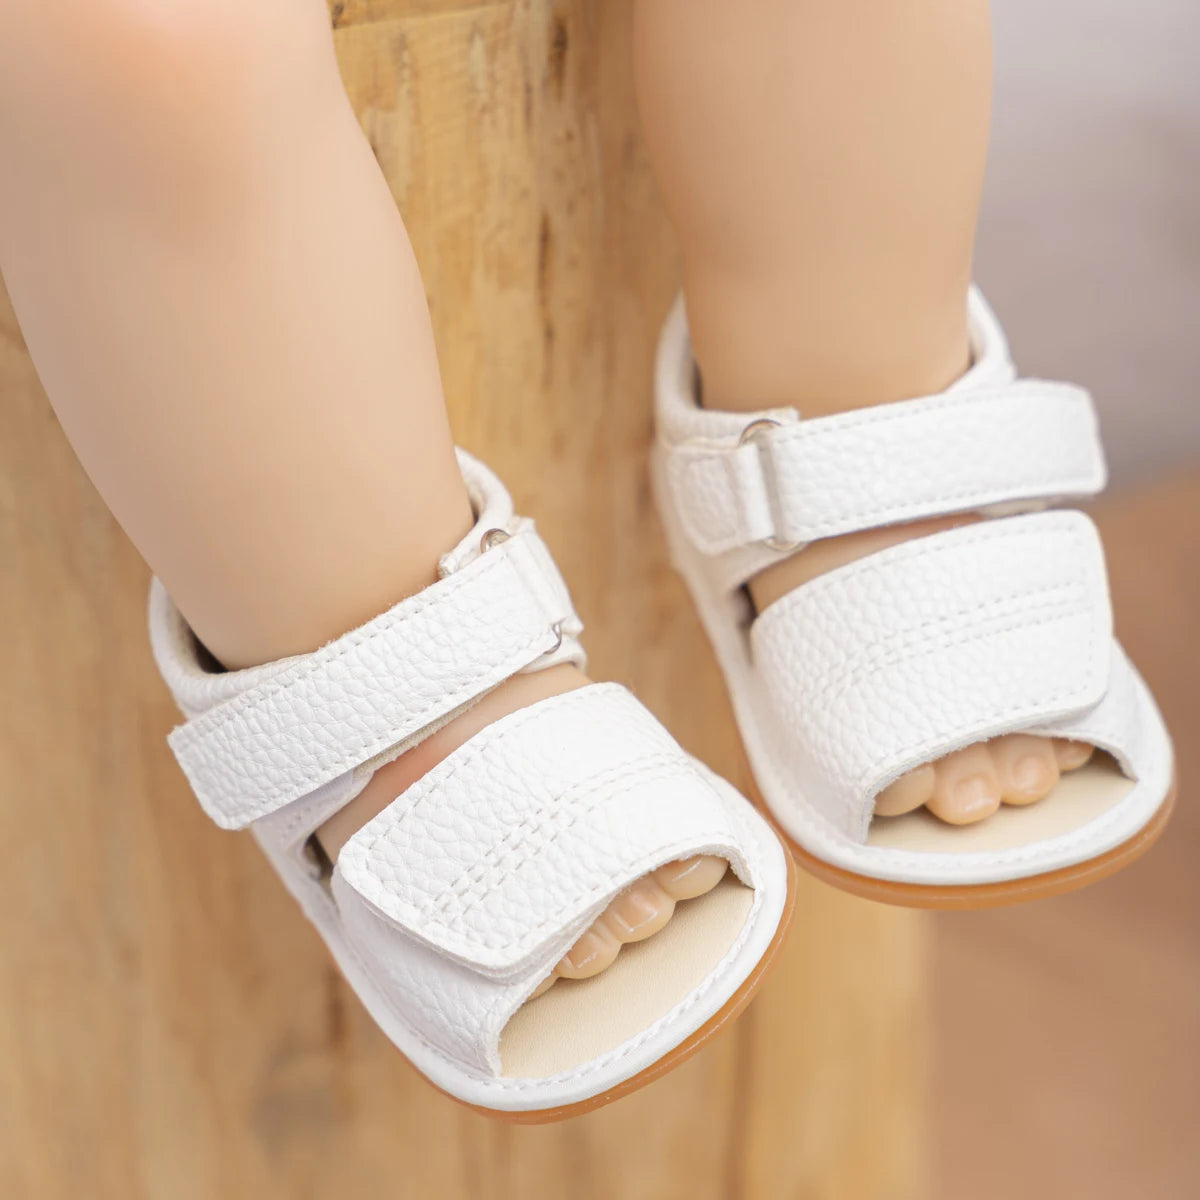 KIDSUN Baby Sandals Shoes Rubber Cotton Anti-slip Toddler Shoes Girl Boy Casual Walikng Shoes Outdoor Summer Shoes